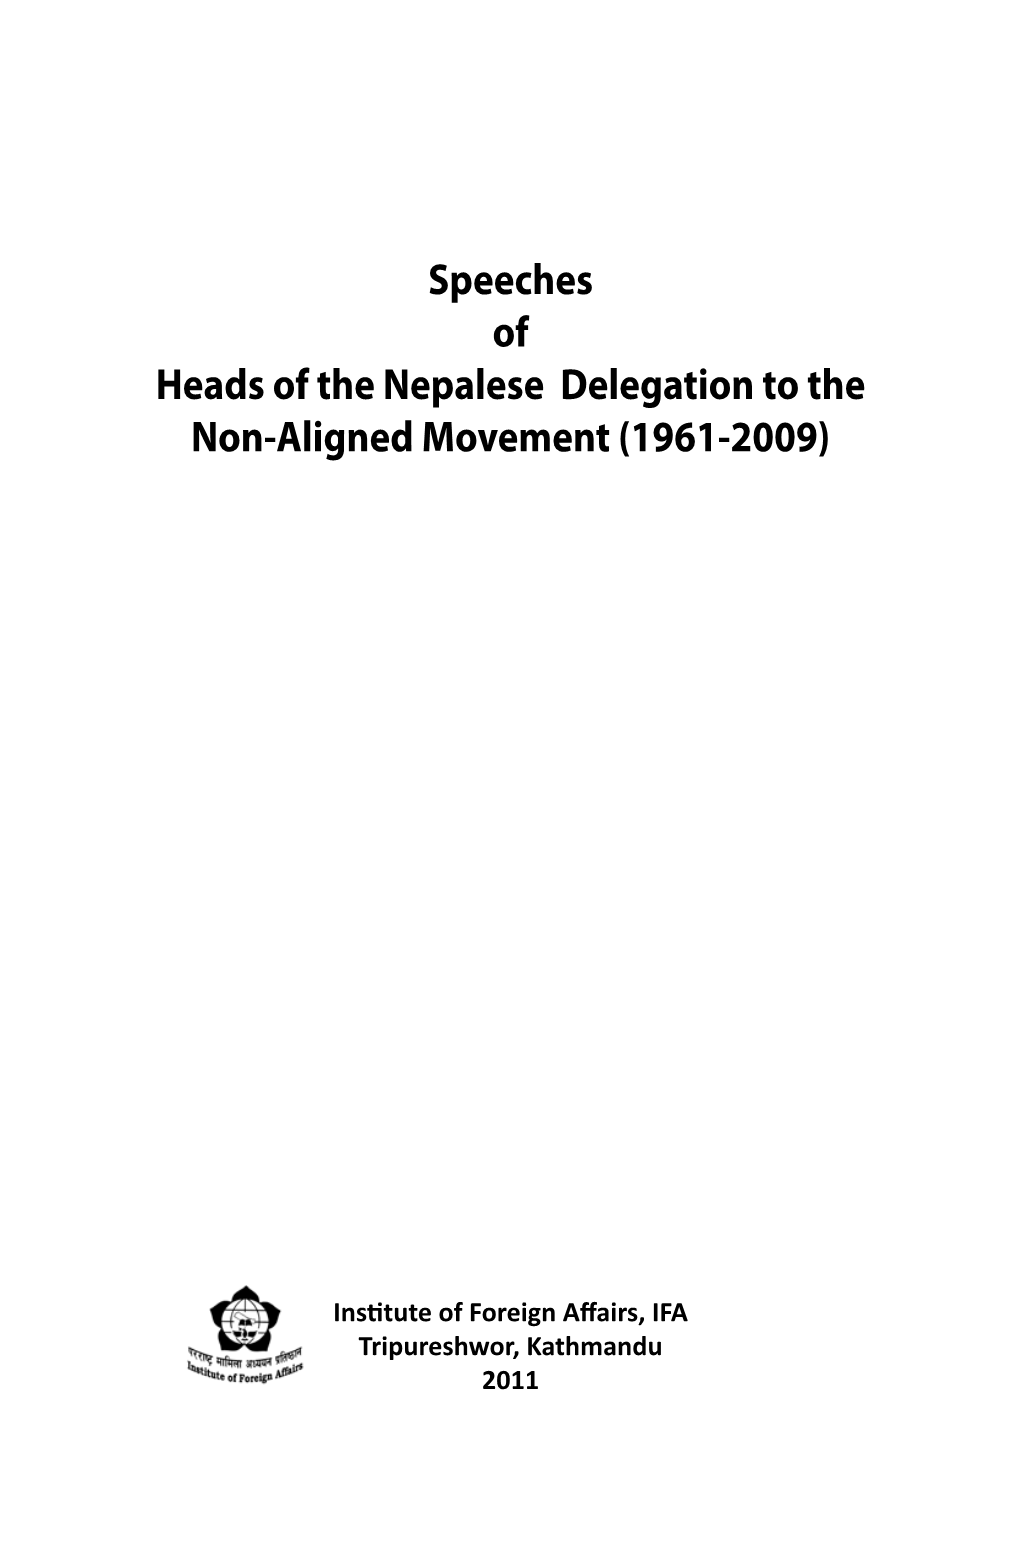 Speeches of Heads of the Nepalese Delegation to the Non-Aligned Movement (1961-2009)